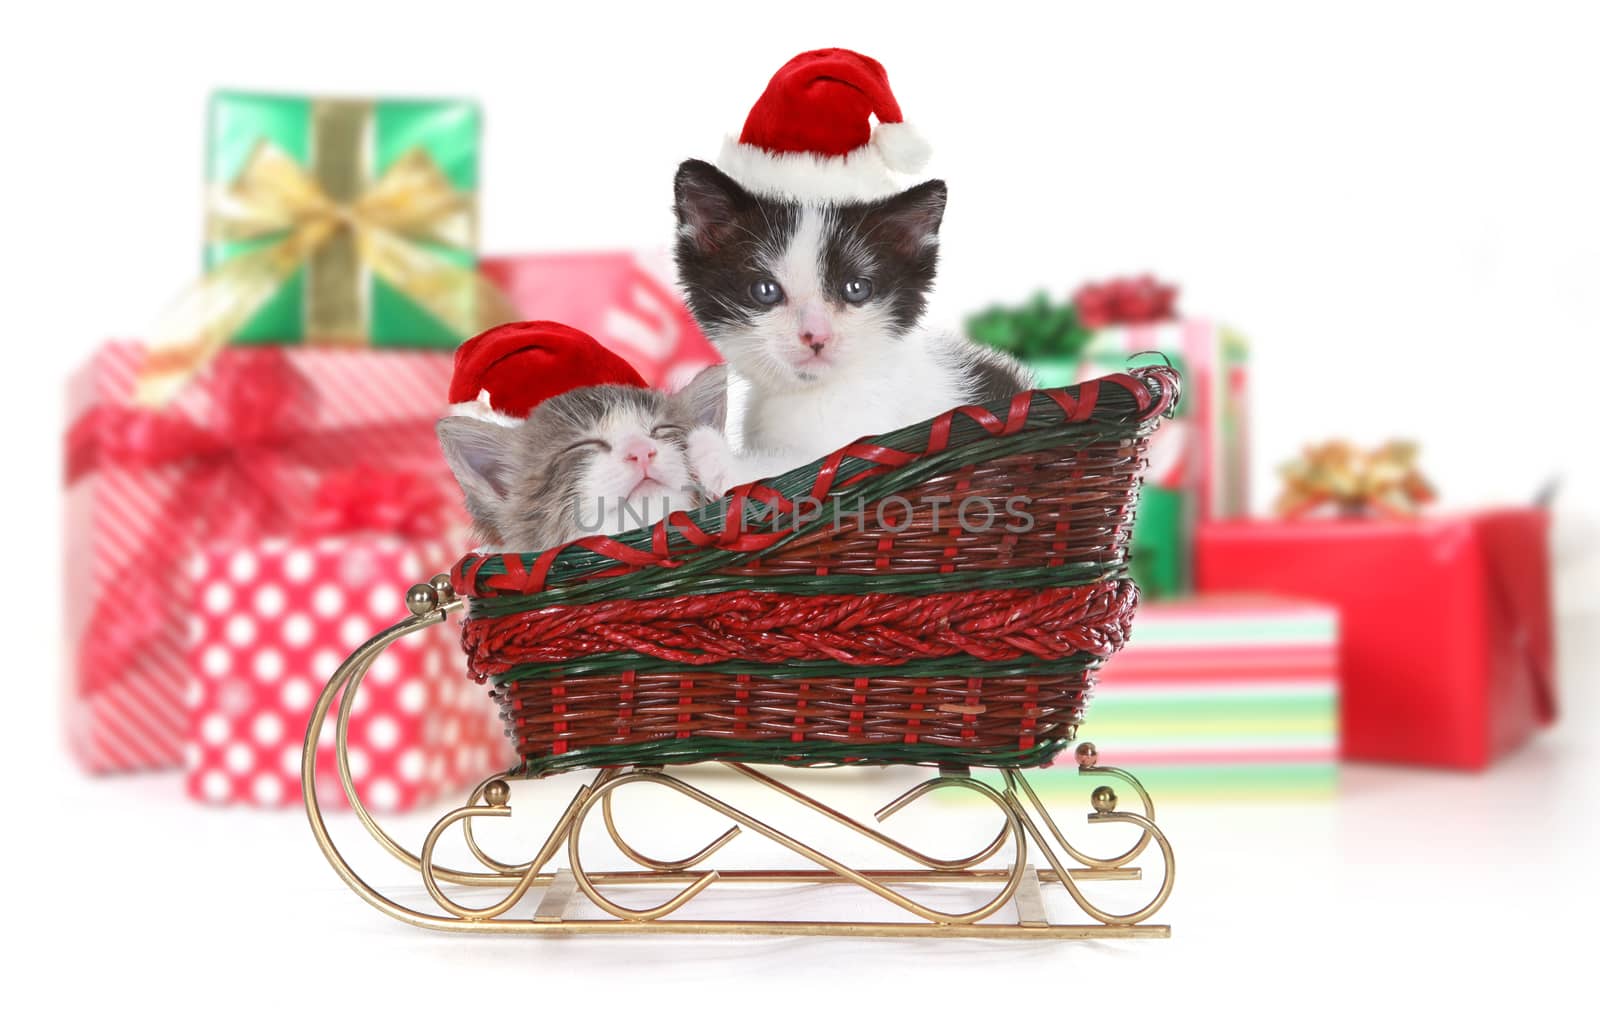 Kittens in a Christmas Santa Sleigh With Gifts